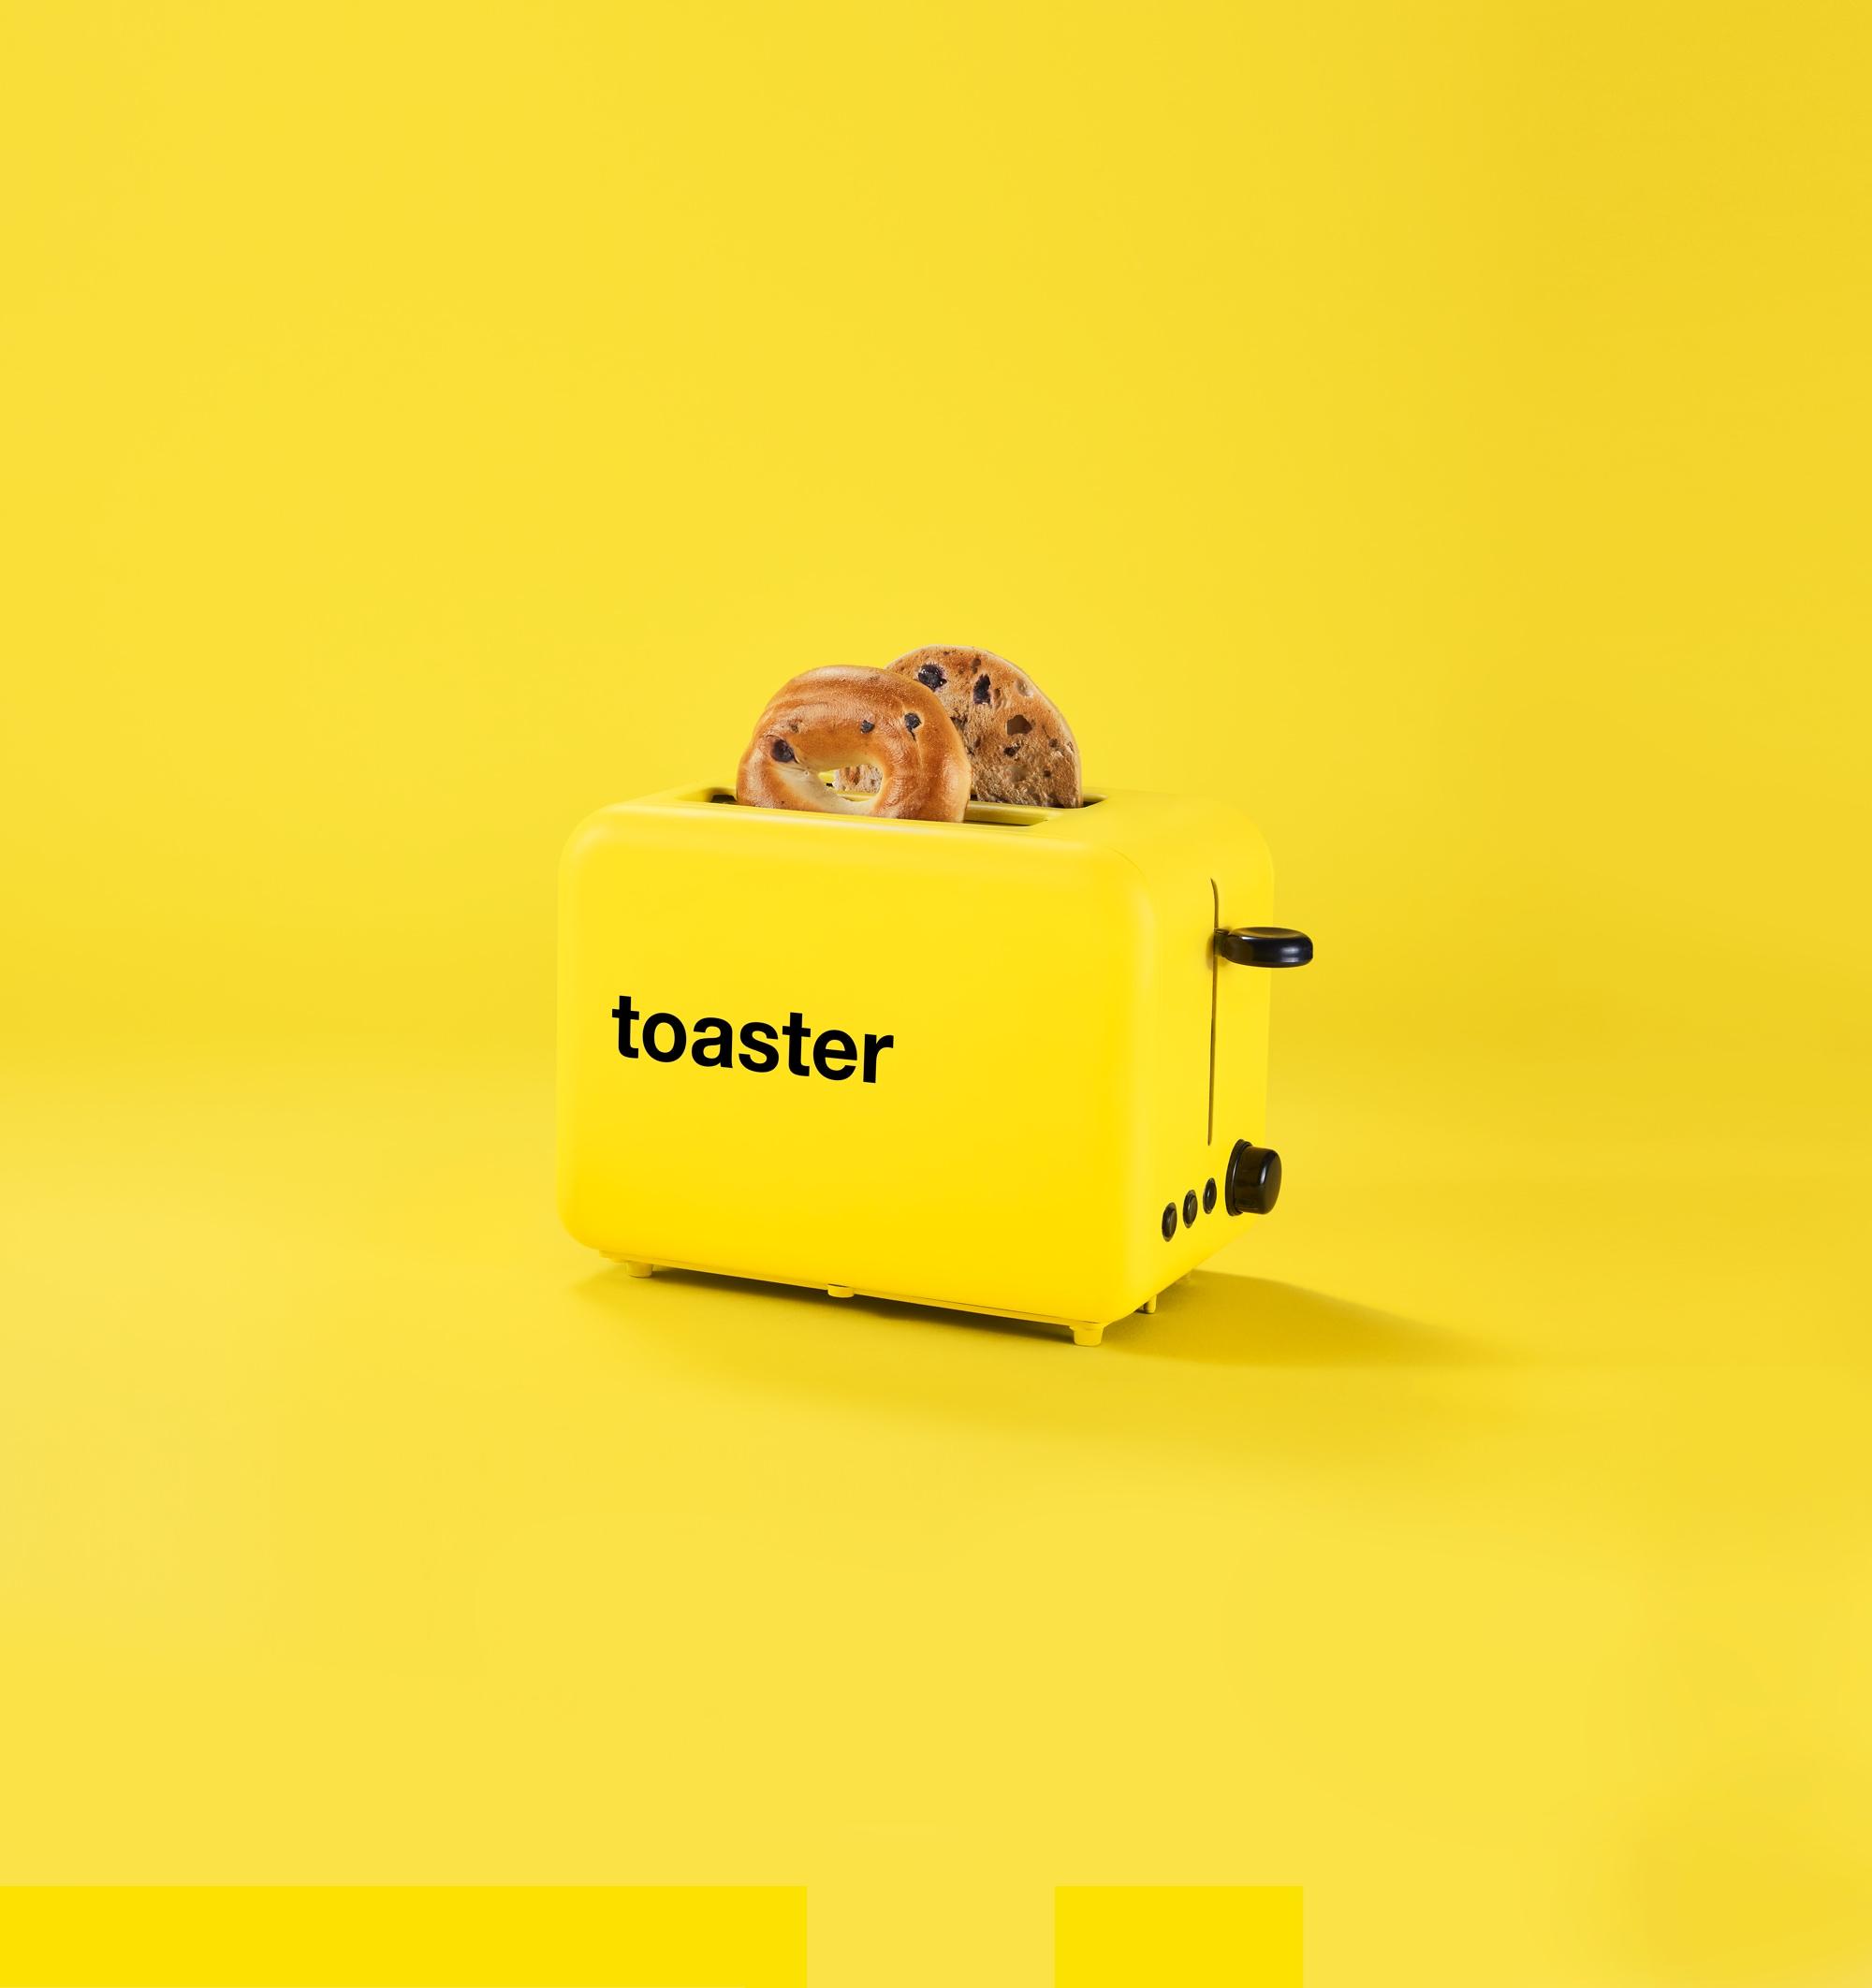 A yellow background with a yellow toaster. There are two blueberry bagels popped up out of the toaster. The word “toaster” is printed on the toaster in true no name style.